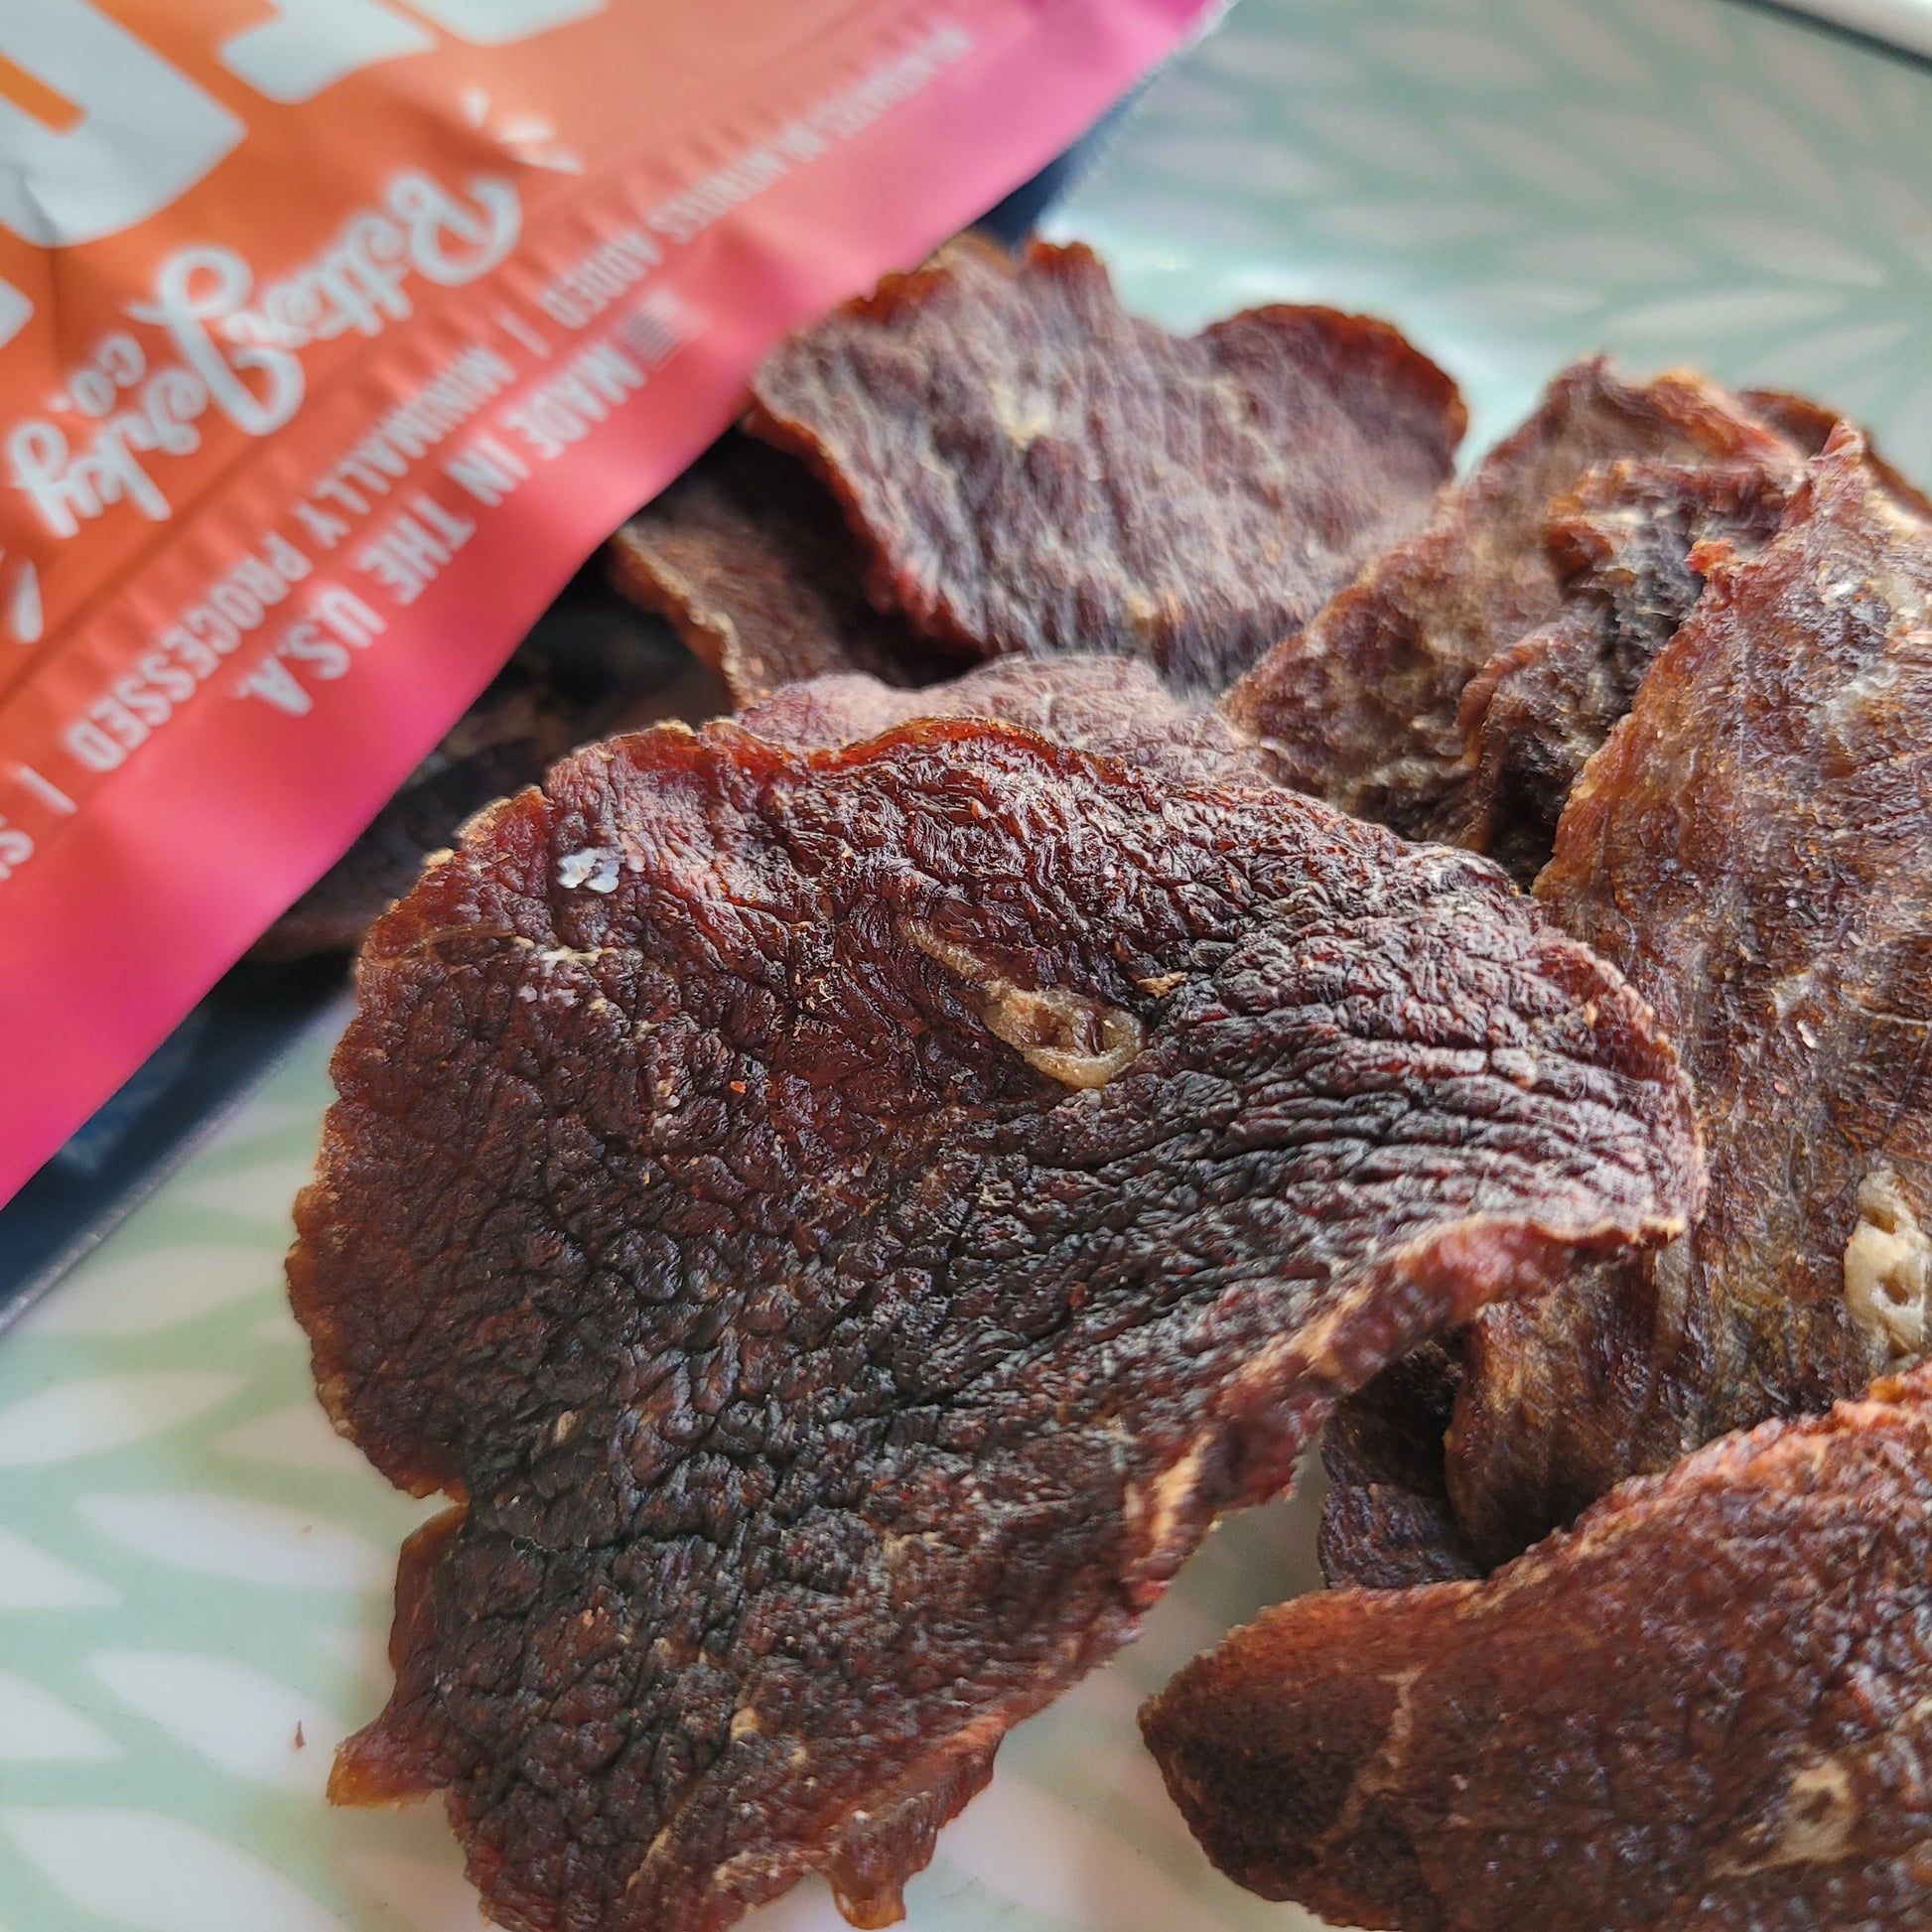 Beef Jerky Chips for dogs and cats. Made with 100% human-grade beef, perfect for training and snacking for pets.